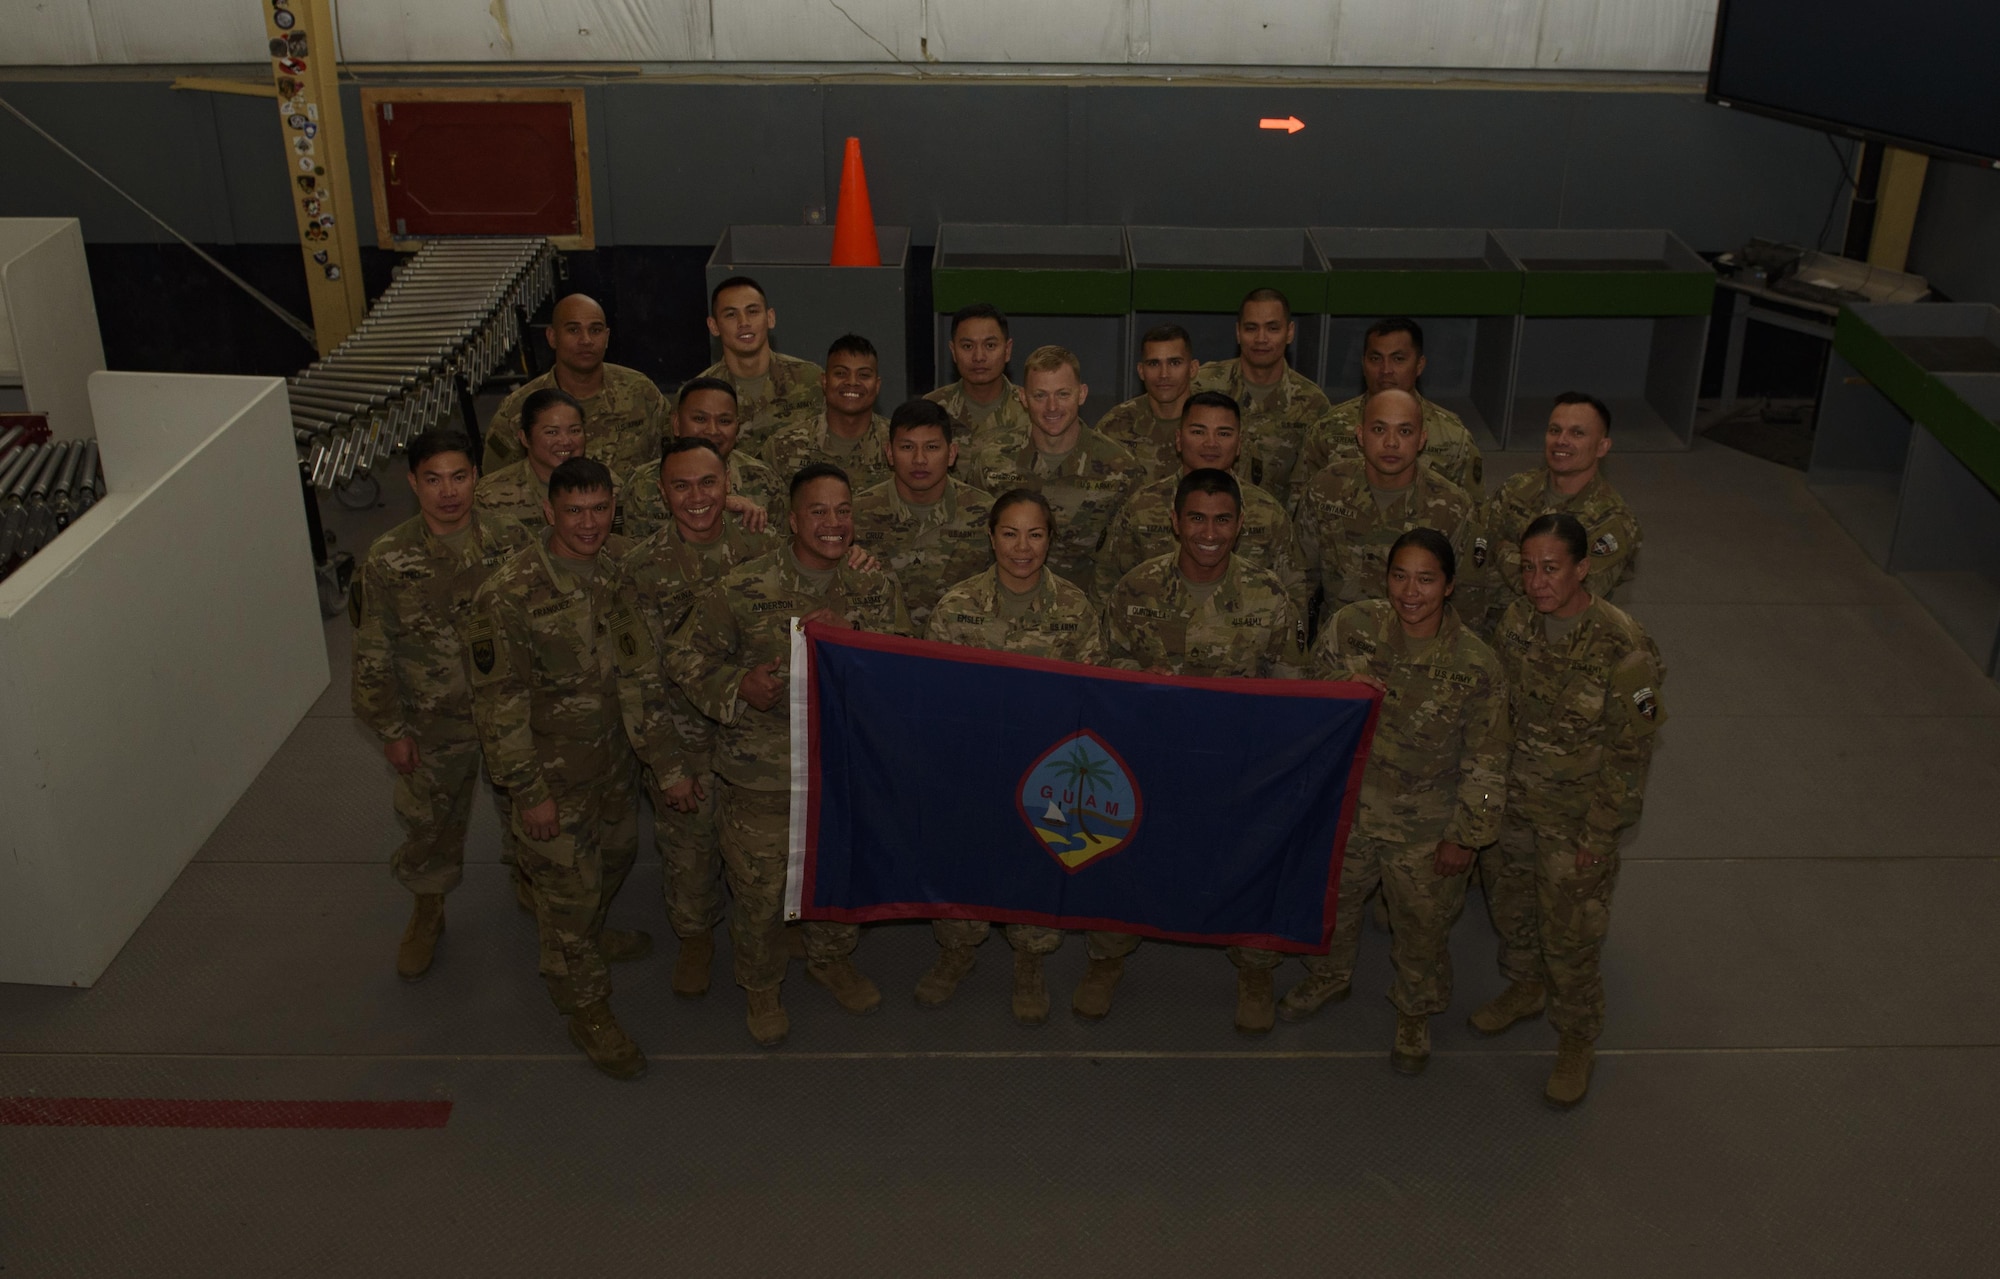 Soldiers assigned to the 368th Military Police Company, Detachment 5, from Guam pose for a photo on Bagram Airfield, Afghanistan, June 7, 2017. For the past nine months, these soldiers served as Gen. John Nicholson’s personal security detail, responsible for the safety and well-being of him and his staff. Nicholson is the commander of Resolute Support and U.S. Forces Afghanistan. (U.S. Air Force photo by Staff Sgt. Benjamin Gonsier)